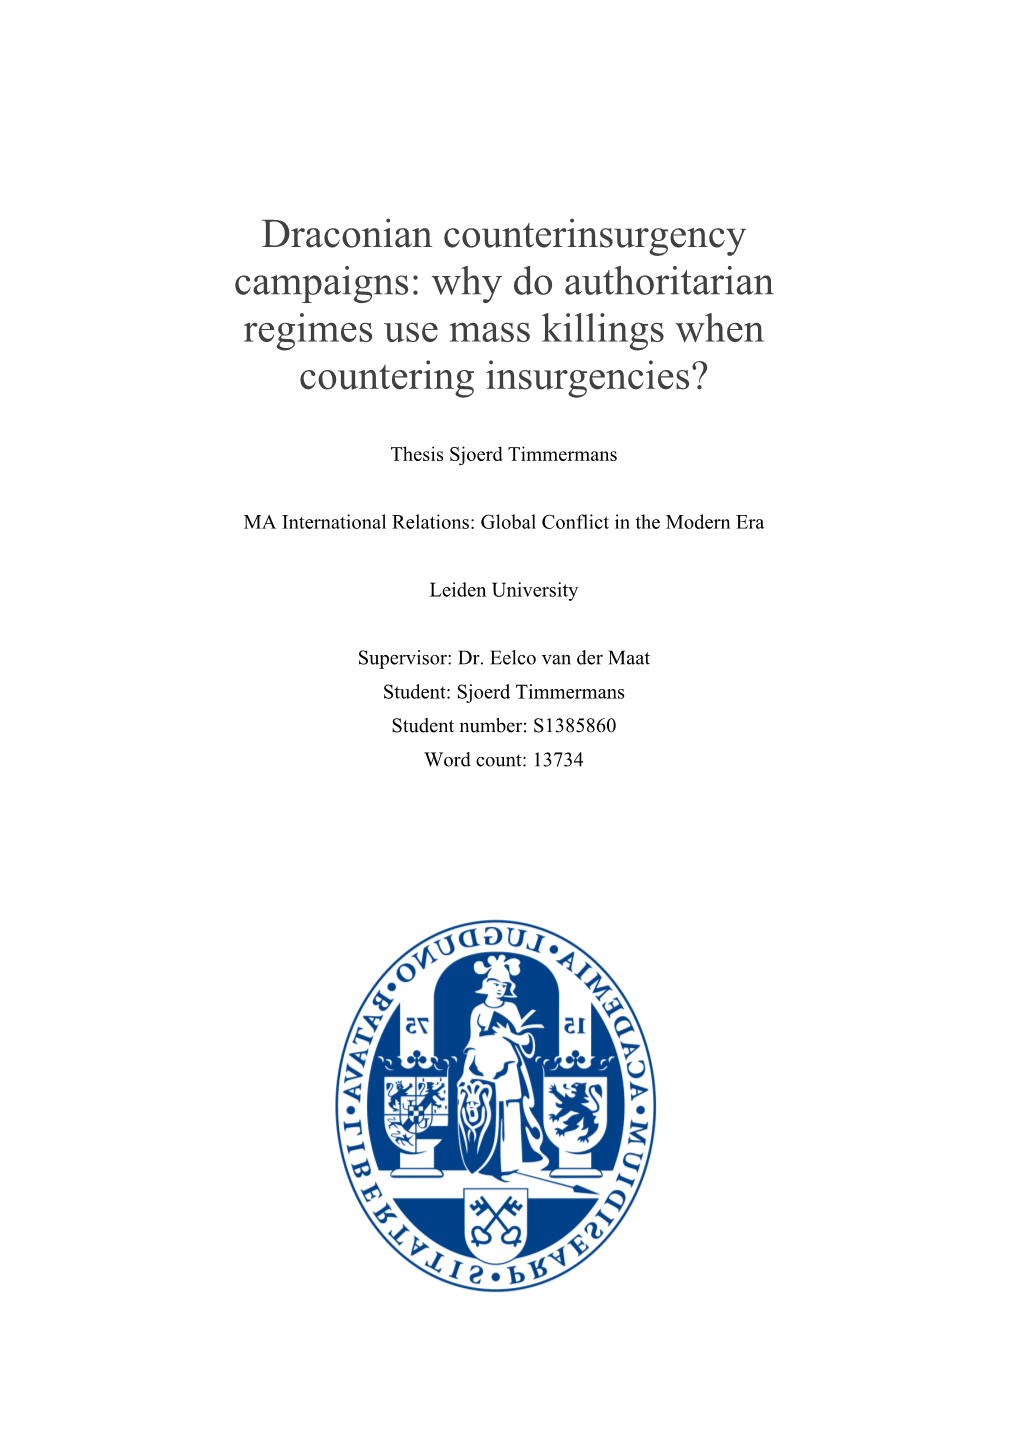 Draconian Counterinsurgency Campaigns: Why Do Authoritarian Regimes Use Mass Killings When Countering Insurgencies?